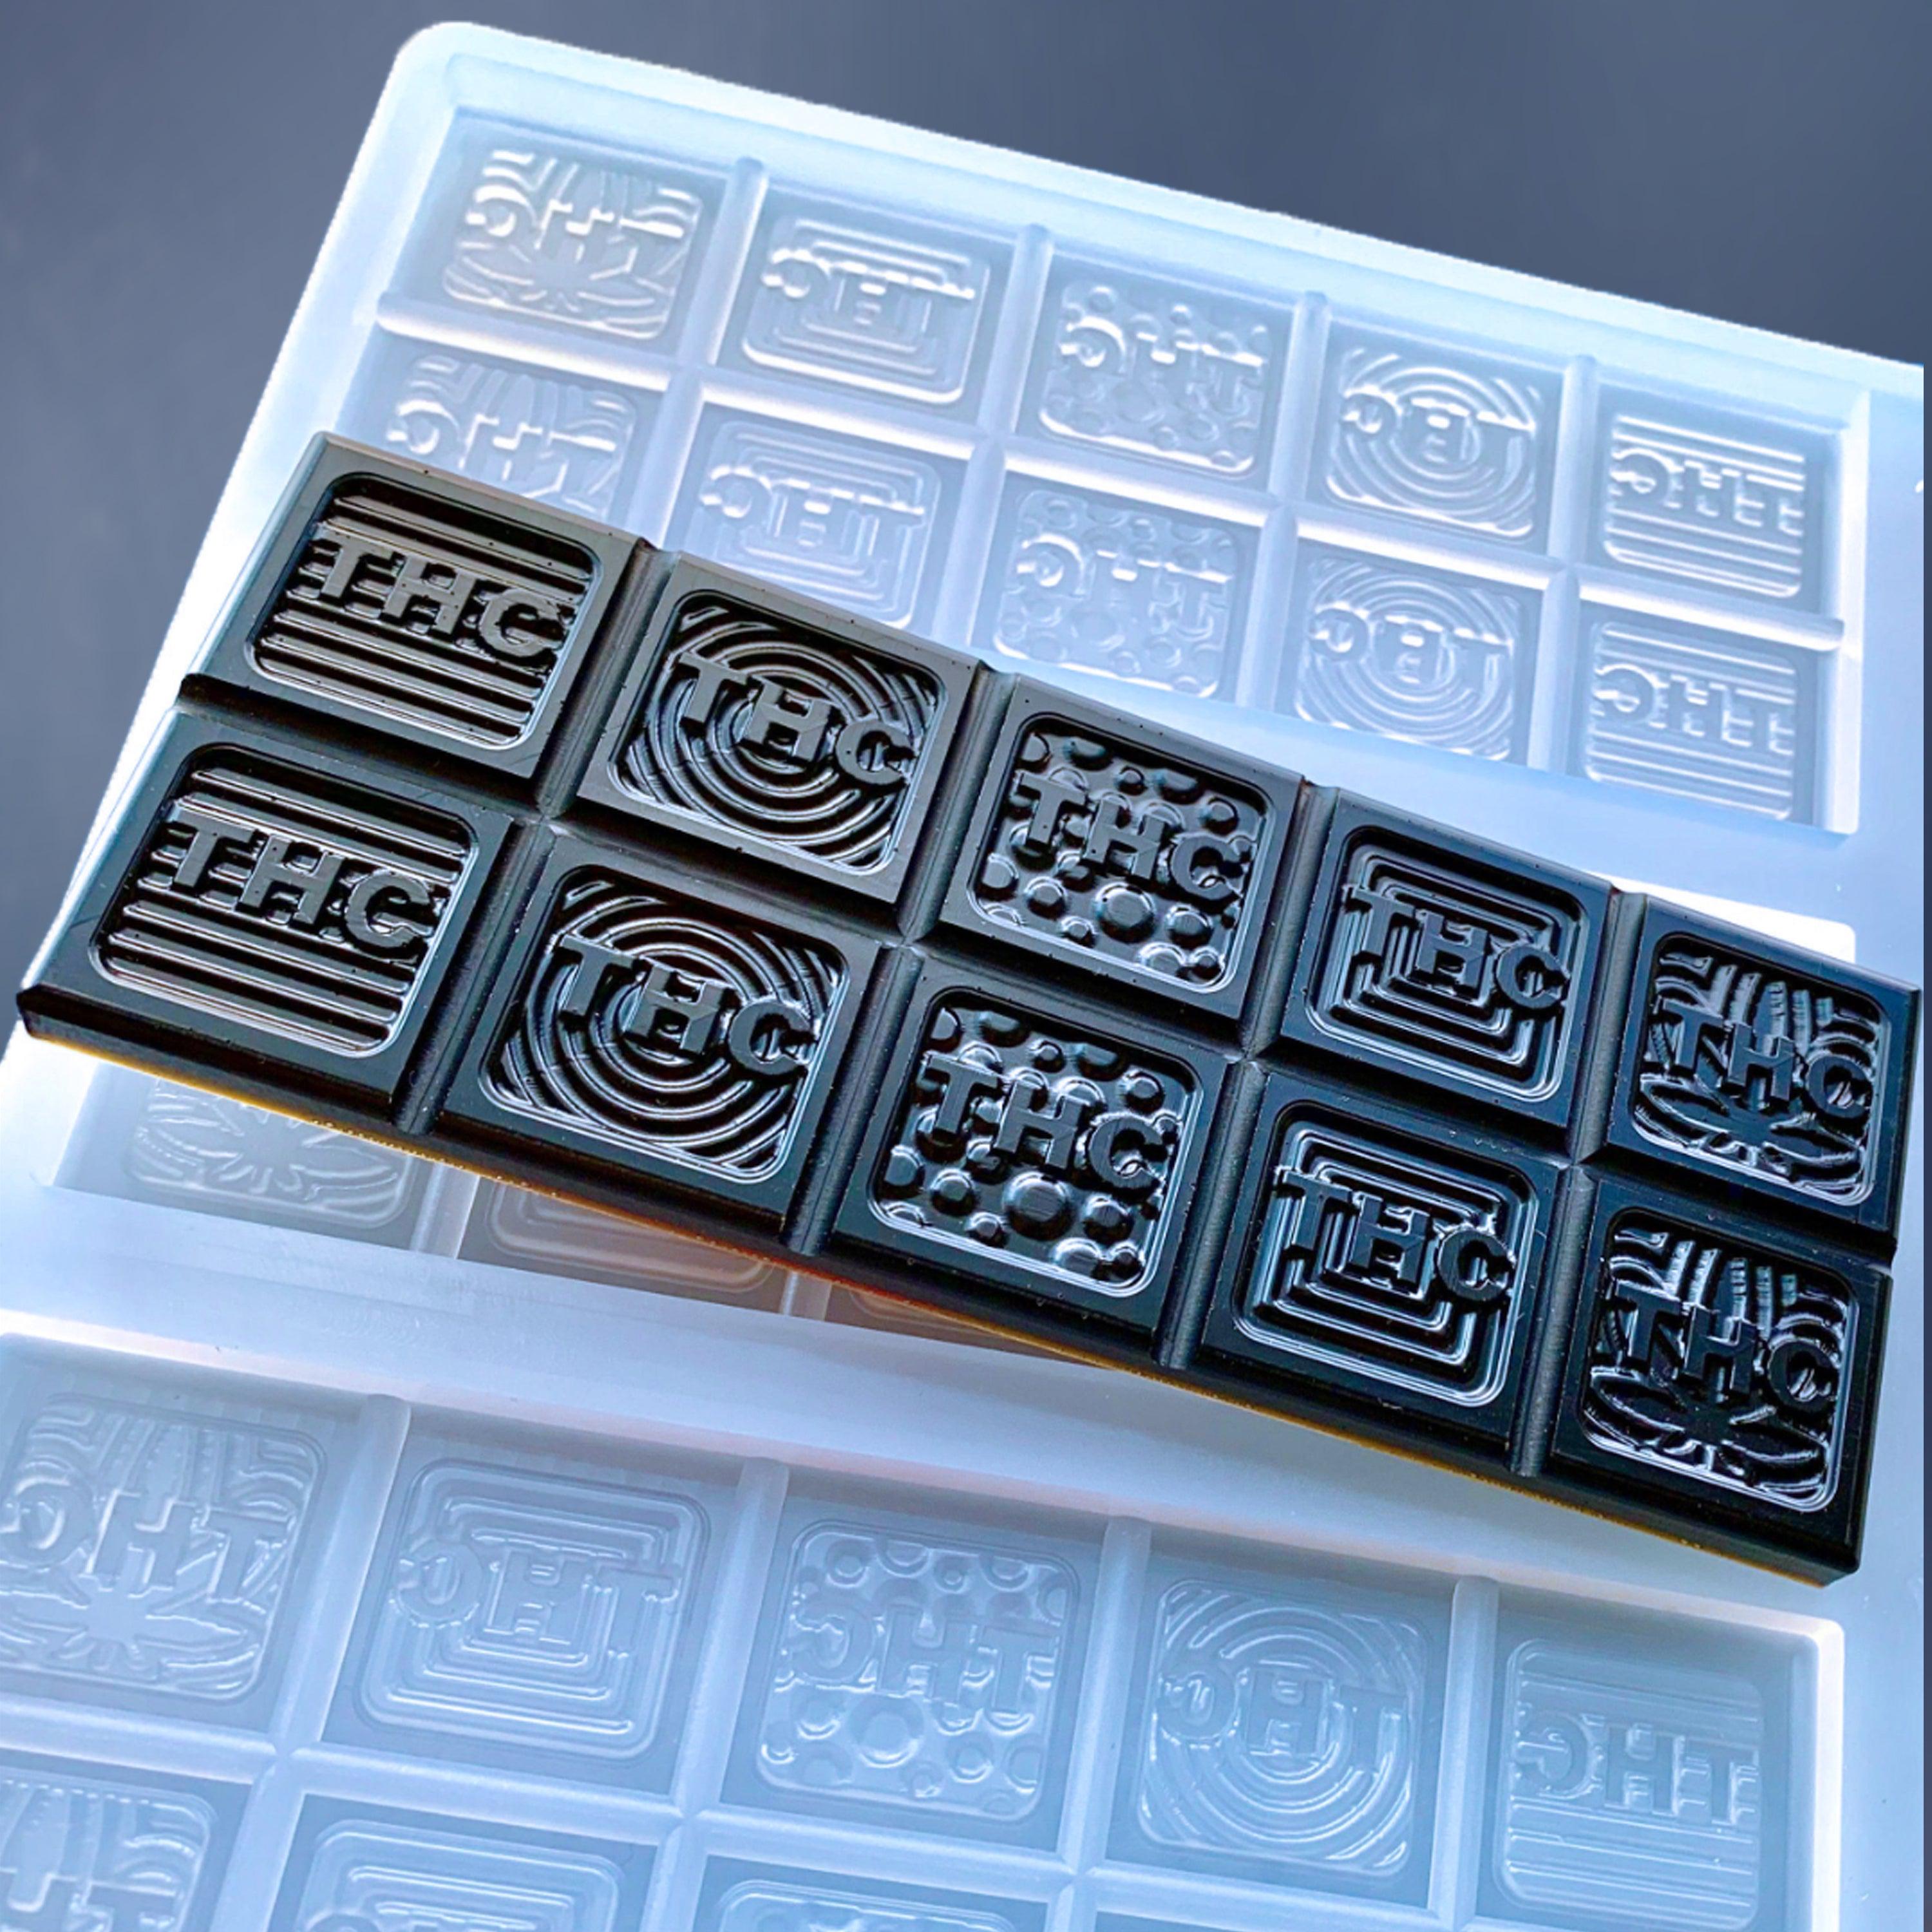 3 Cell Large Chocolate Bar finished Weight Approx 100g -   Chocolate  bar molds, Silicone chocolate molds, Candy bar molds